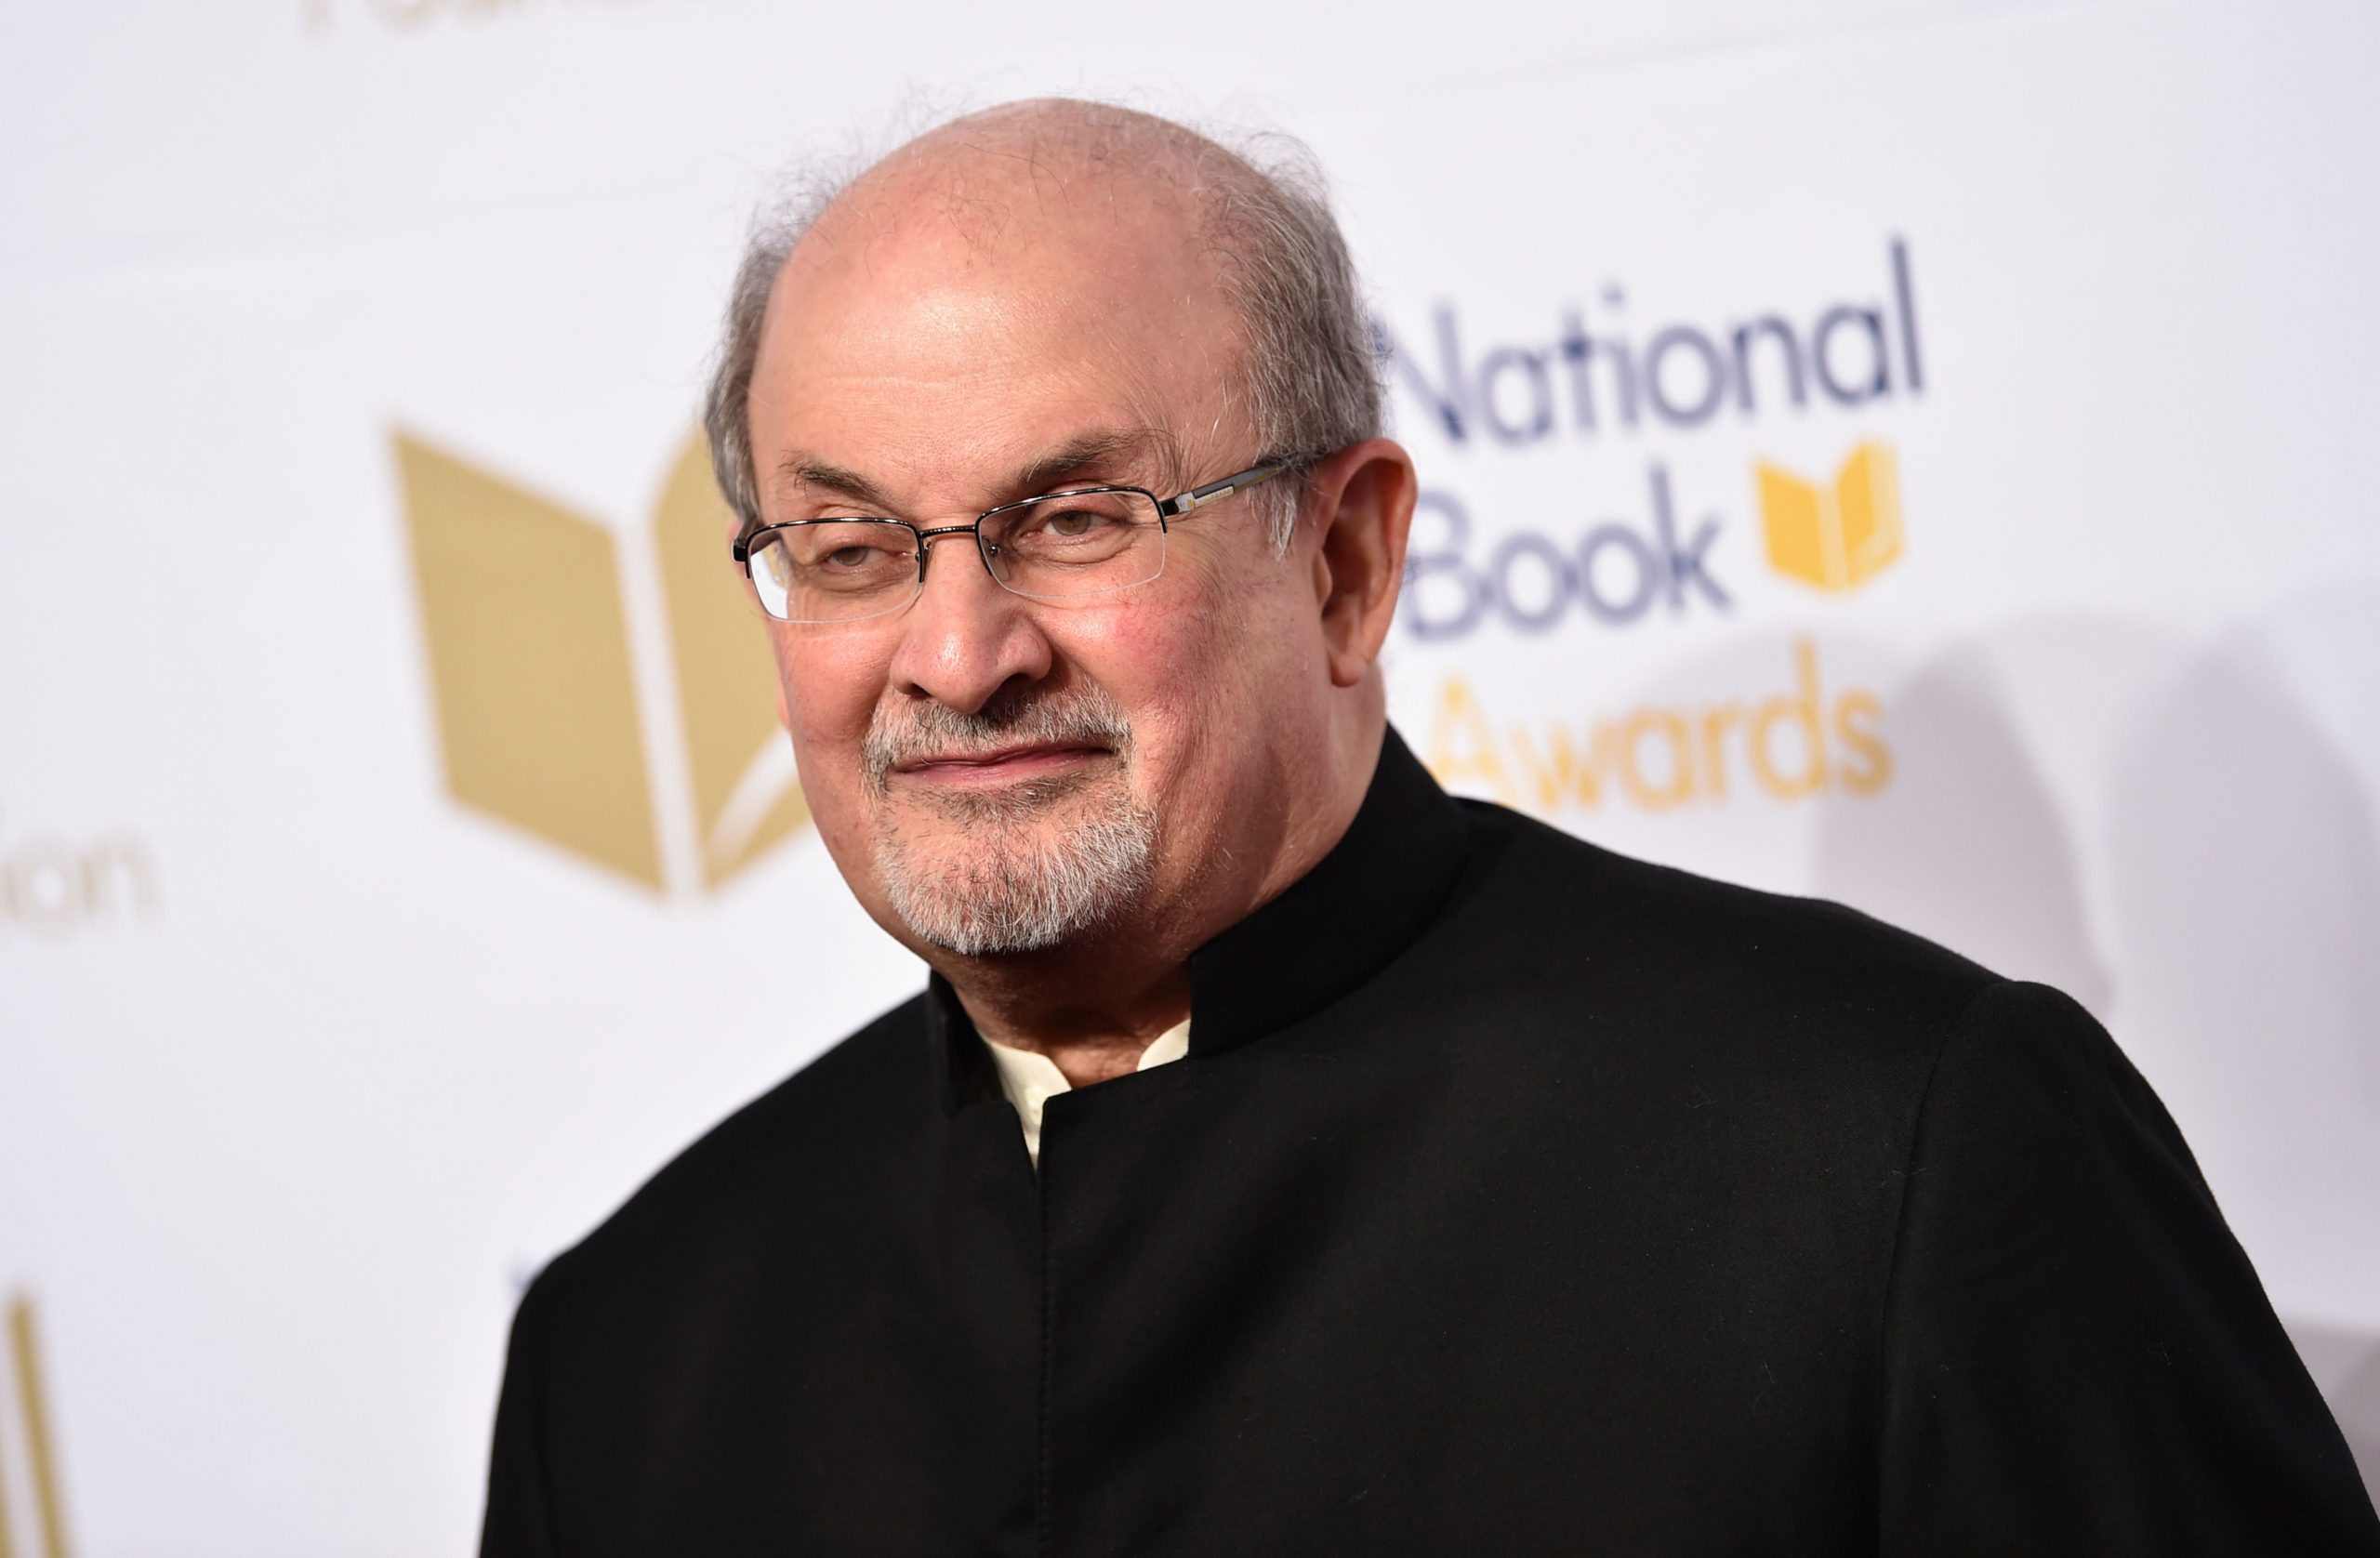 Iran denies being involved in attack on Salman Rushdie